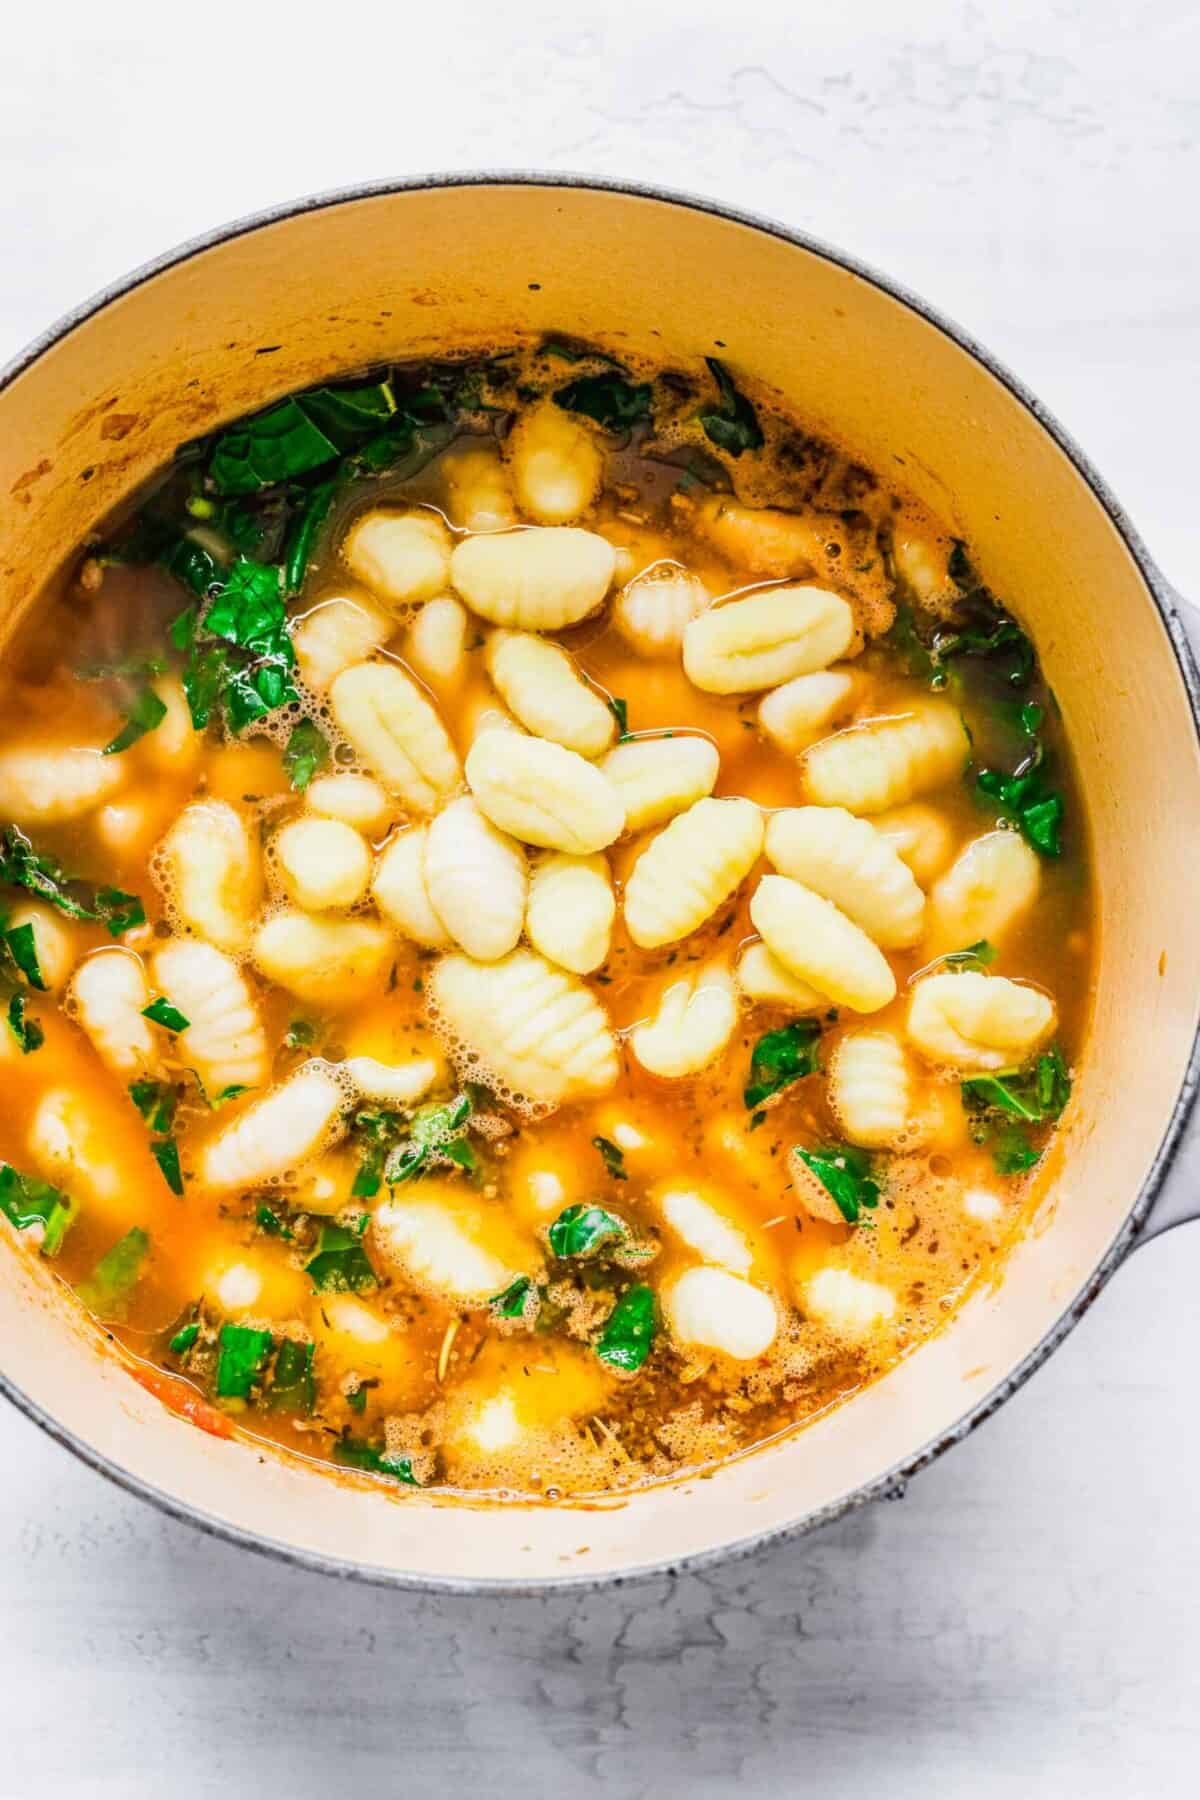 A pot of soup with gnocchi and kale added on top of it